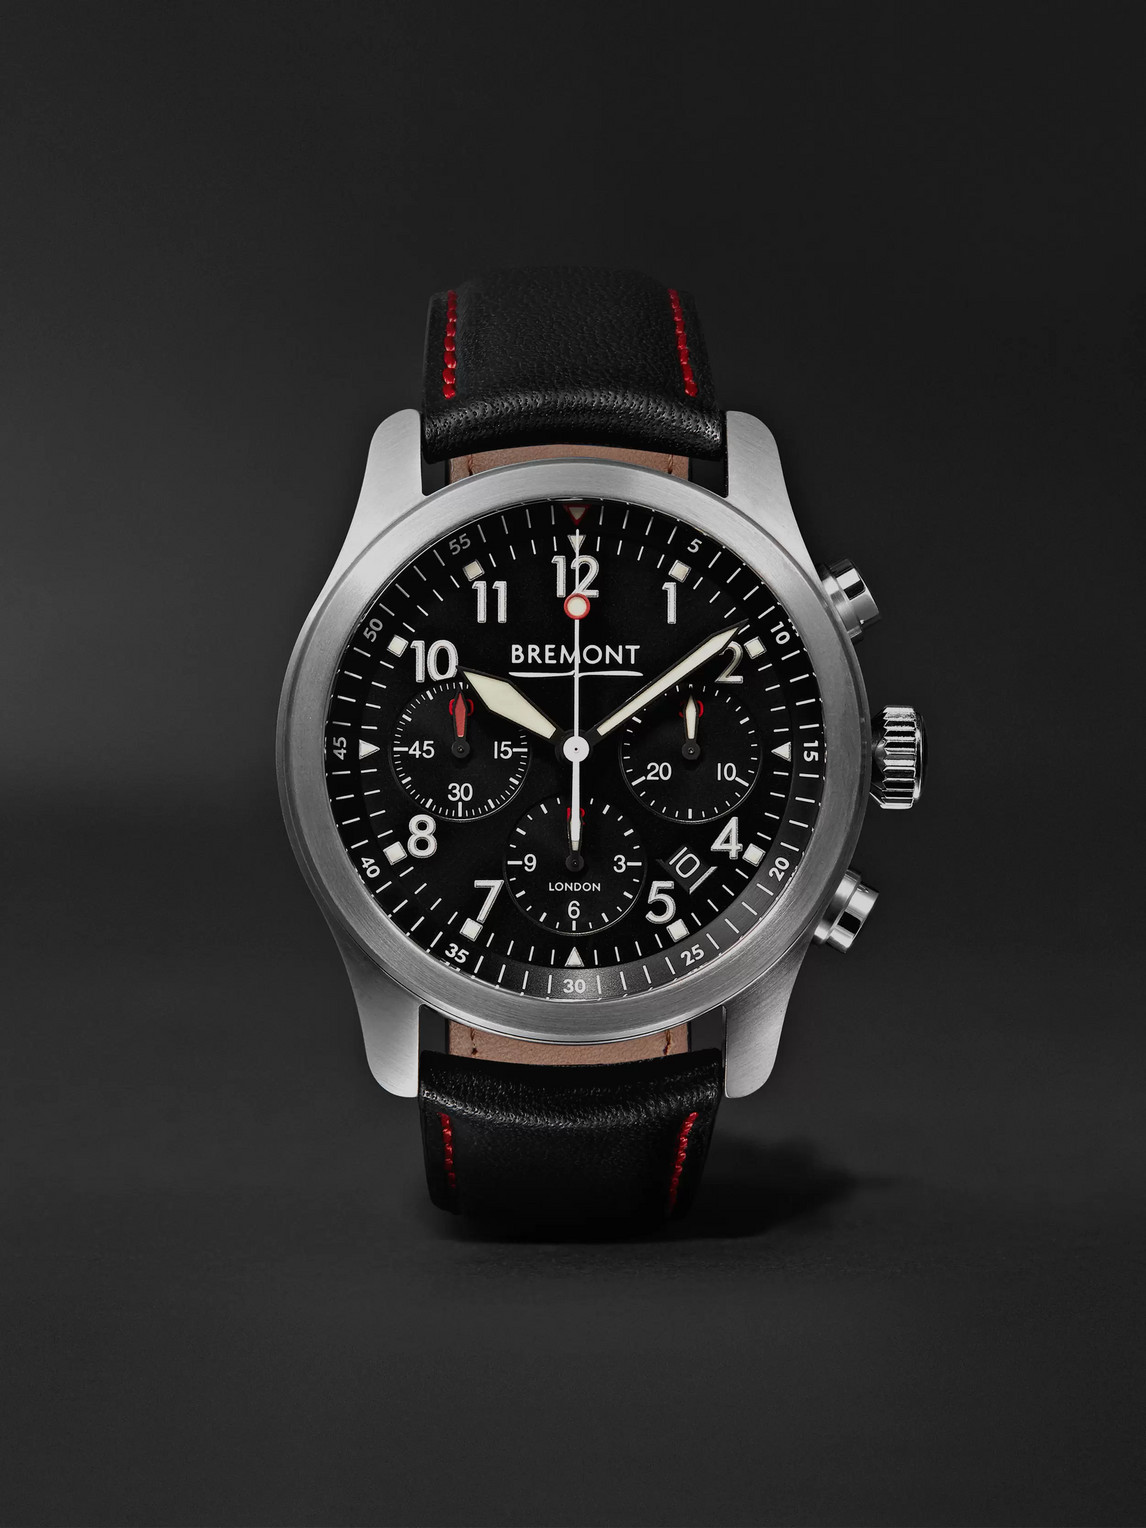 Bremont Alt1-p2 Automatic Chronograph 43mm Stainless Steel Watch, Ref. Alt1-p2-bl-b In Black